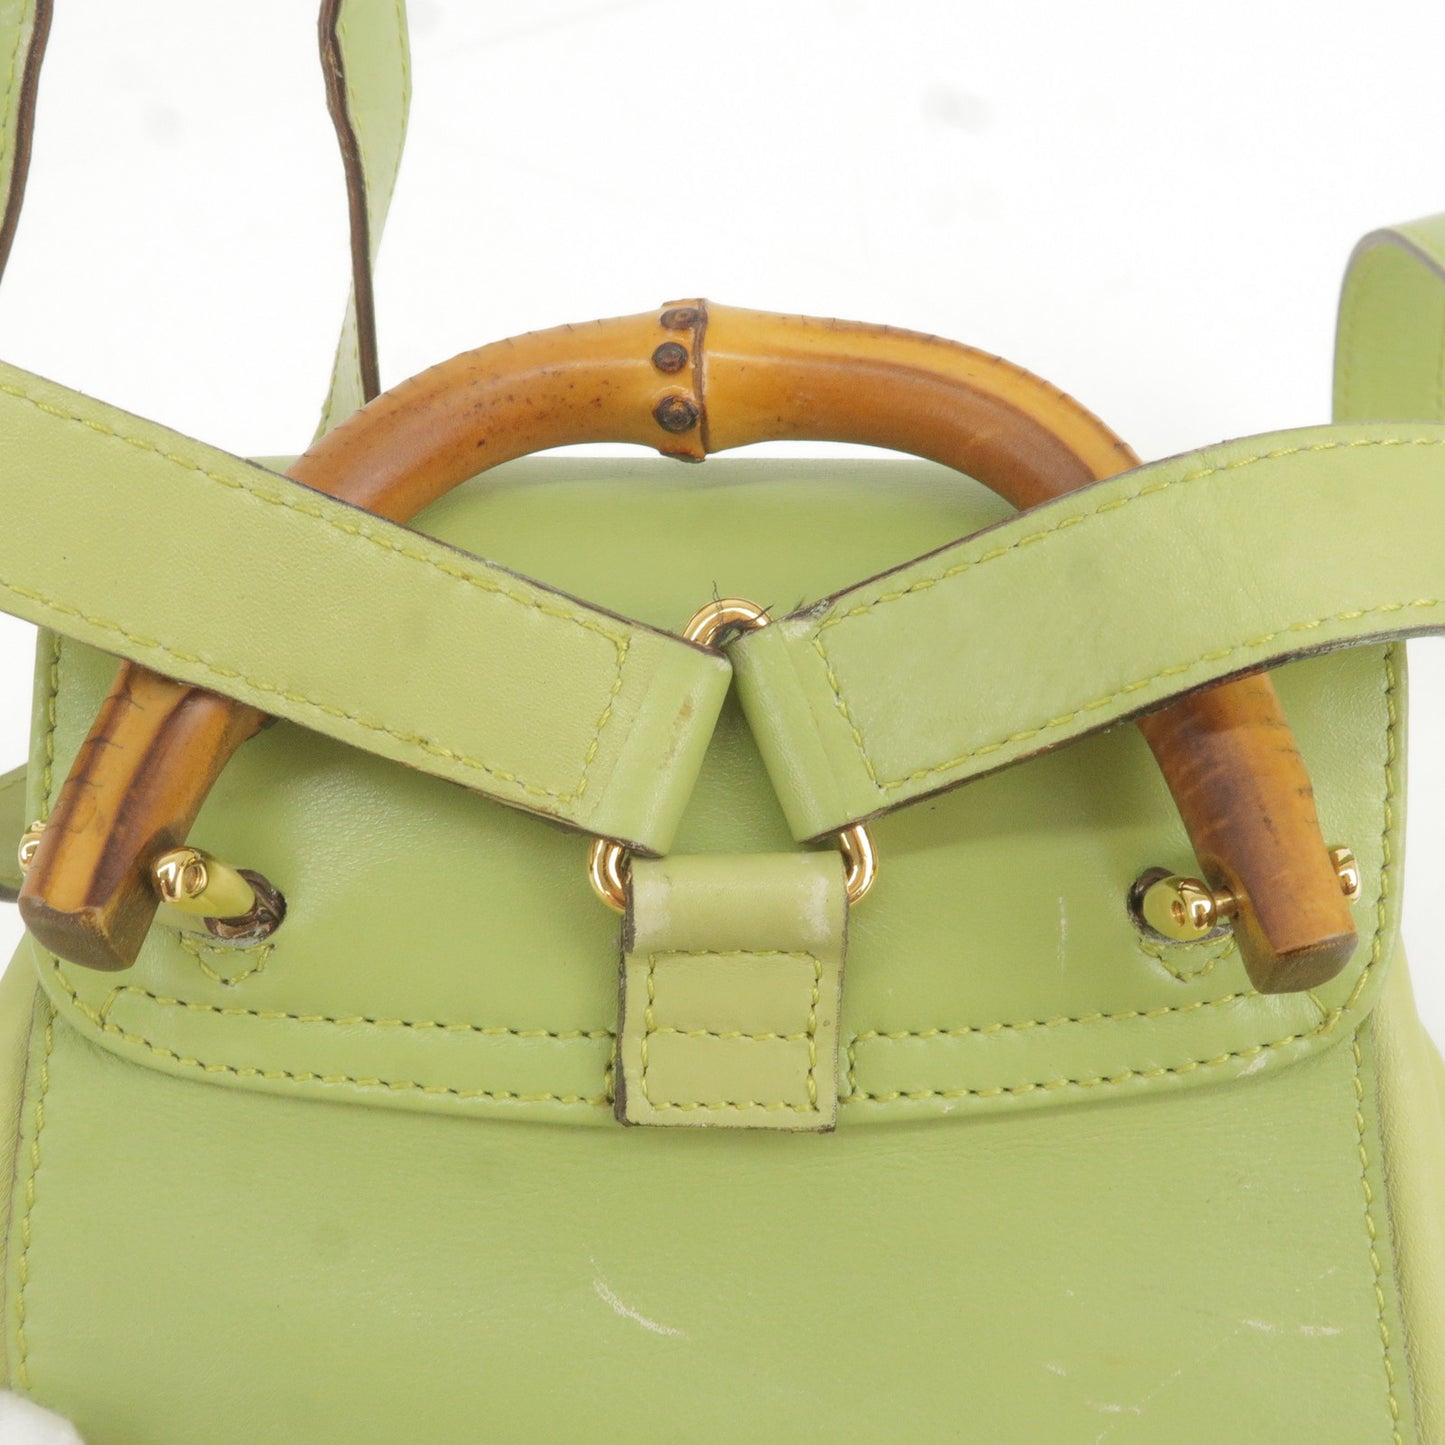 GUCCI Bamboo Leather Back Pack Green 003･2058･0030